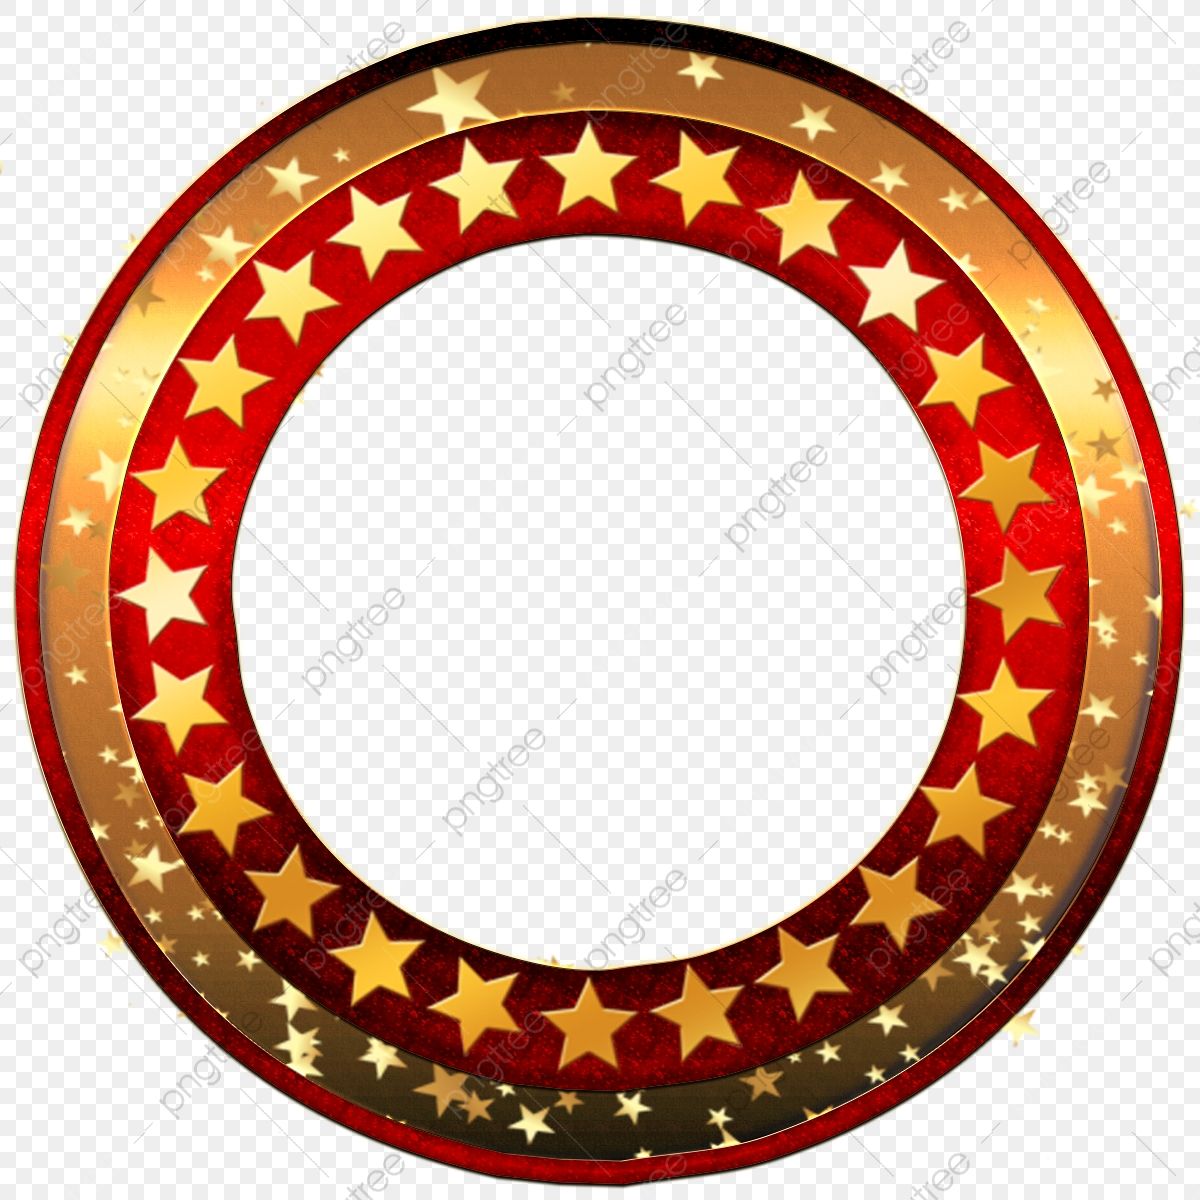 Golden Round Frame PNG Transparent, Red Round Frame With Golden